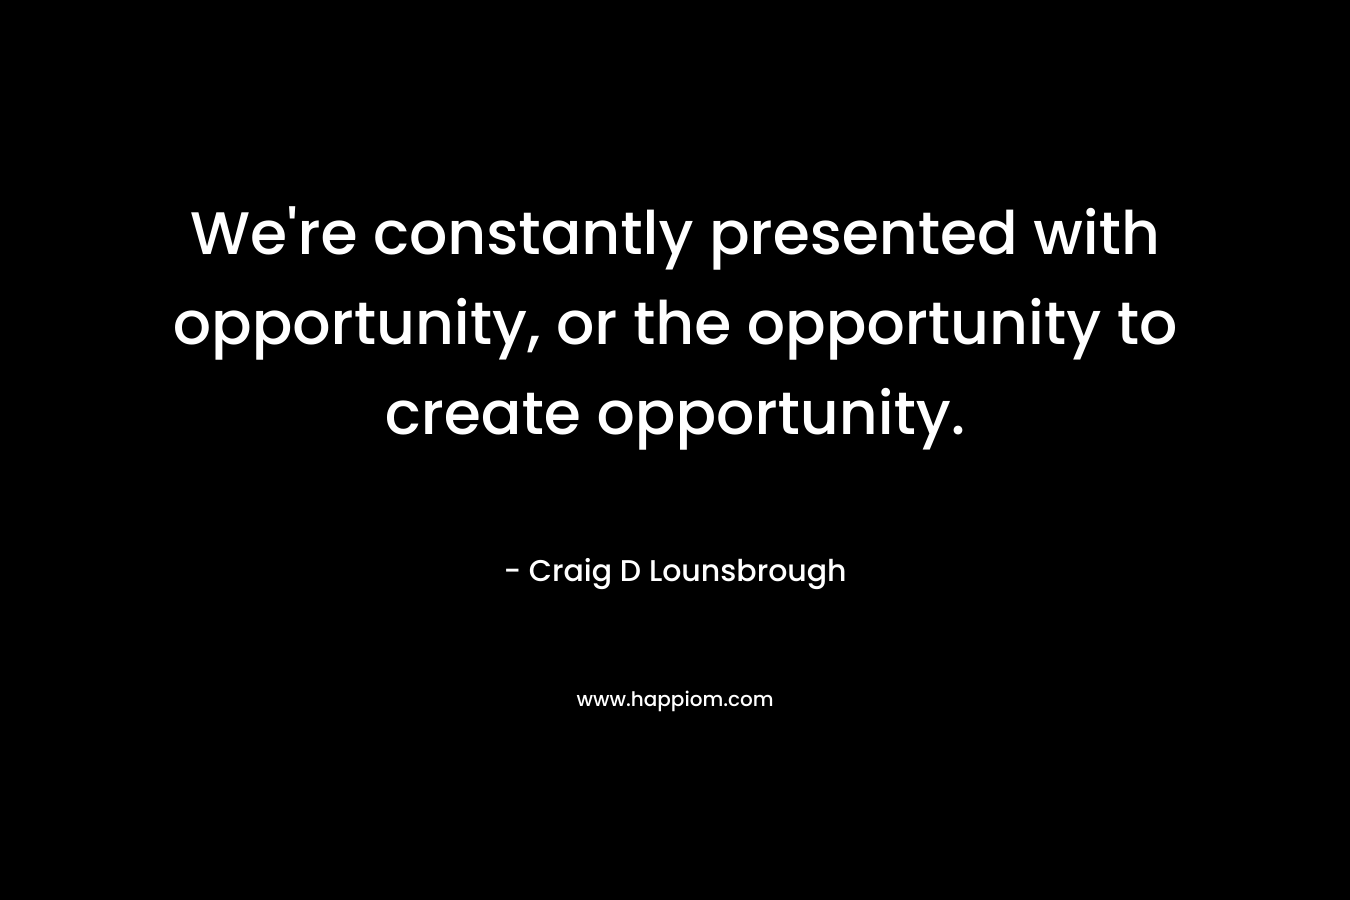 We're constantly presented with opportunity, or the opportunity to create opportunity.